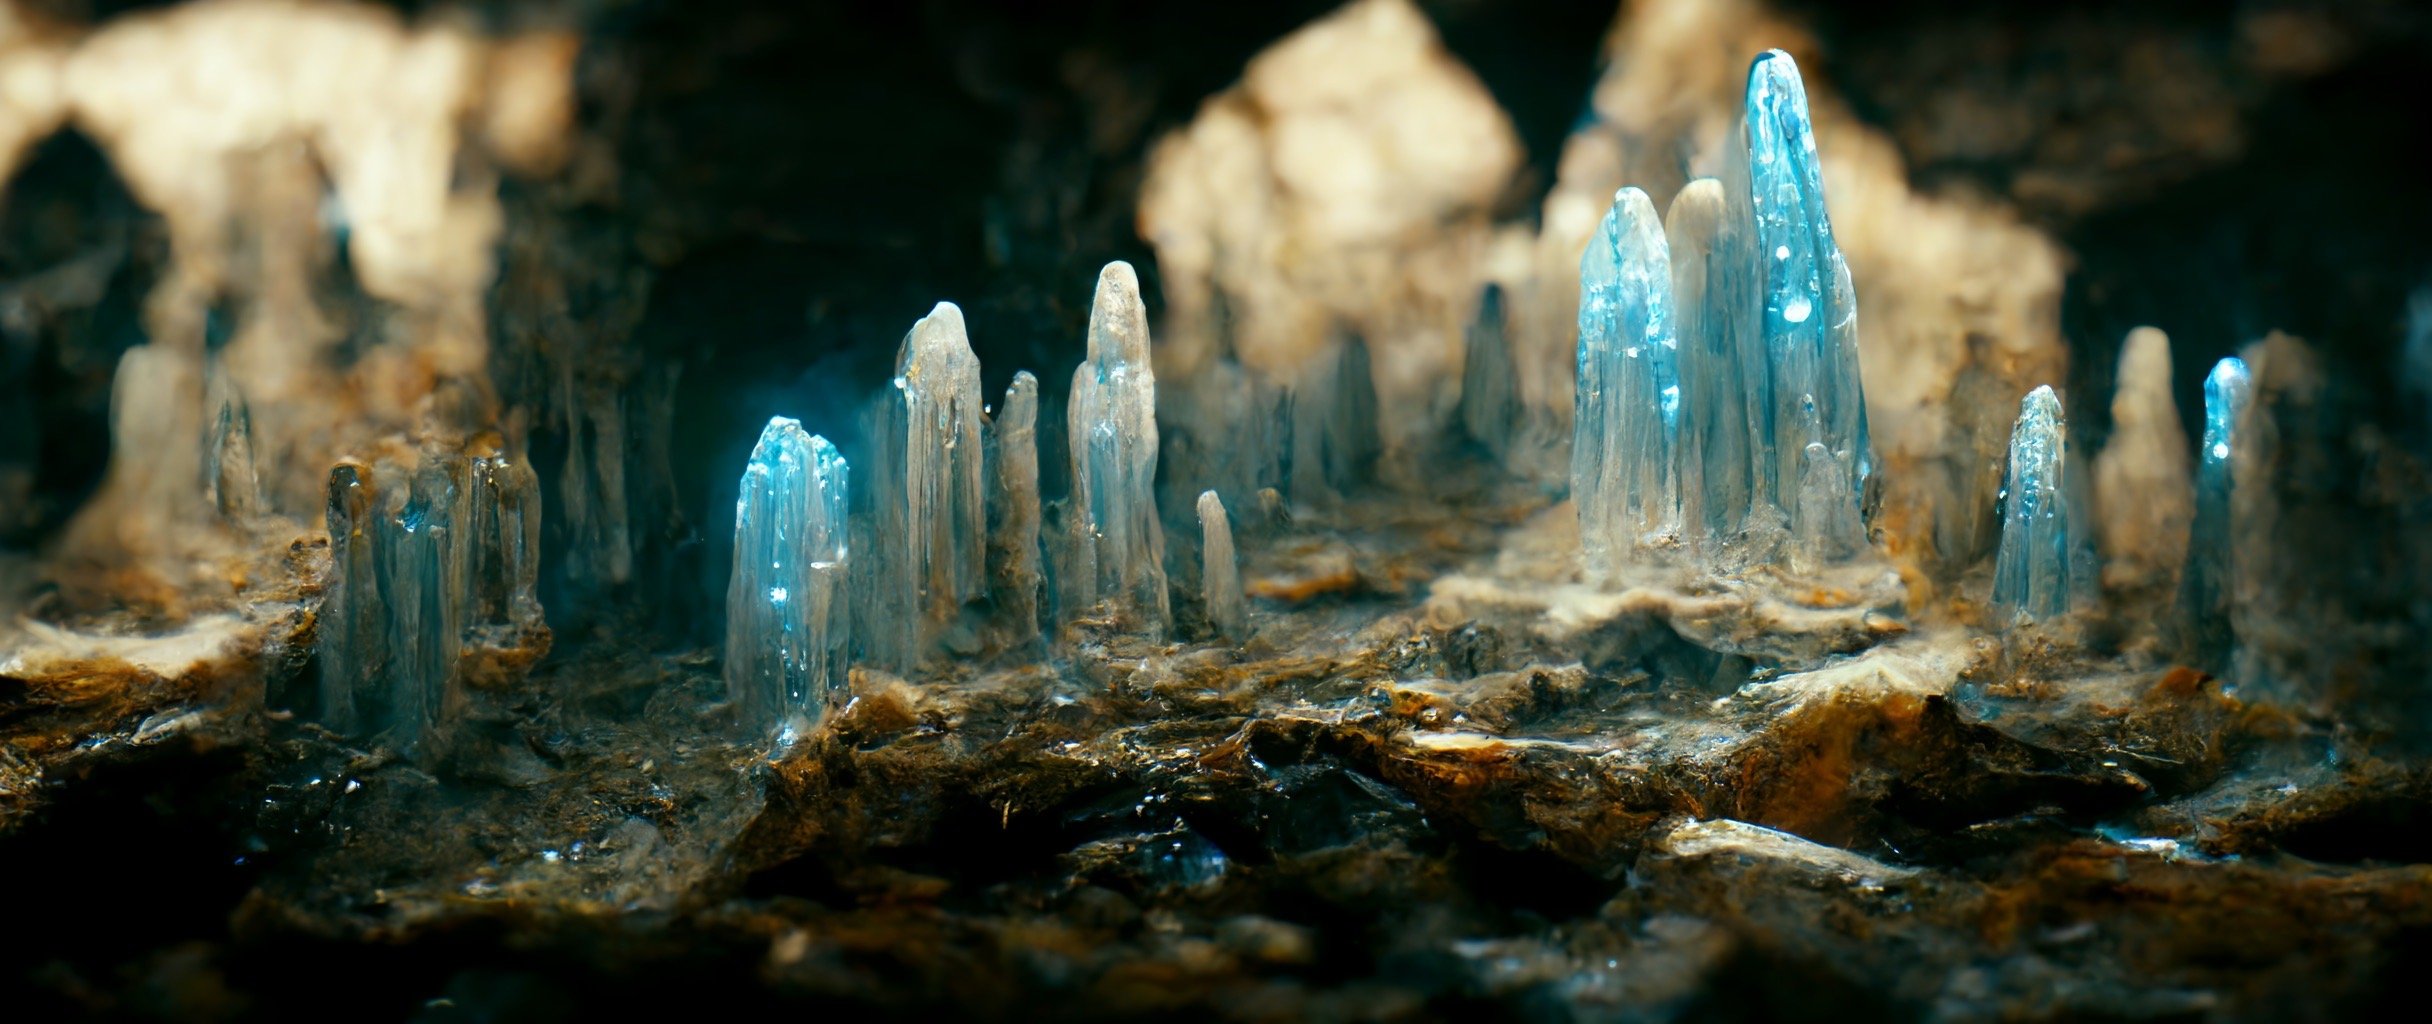 9541dd81-1067-41a2-beea-085f7f196623_S3RAPH_httpss.mj.runqorPEd__incredible_mystical_cave_filled_with_sapphires._Stalactites_and_stalagmites_dri.JPG